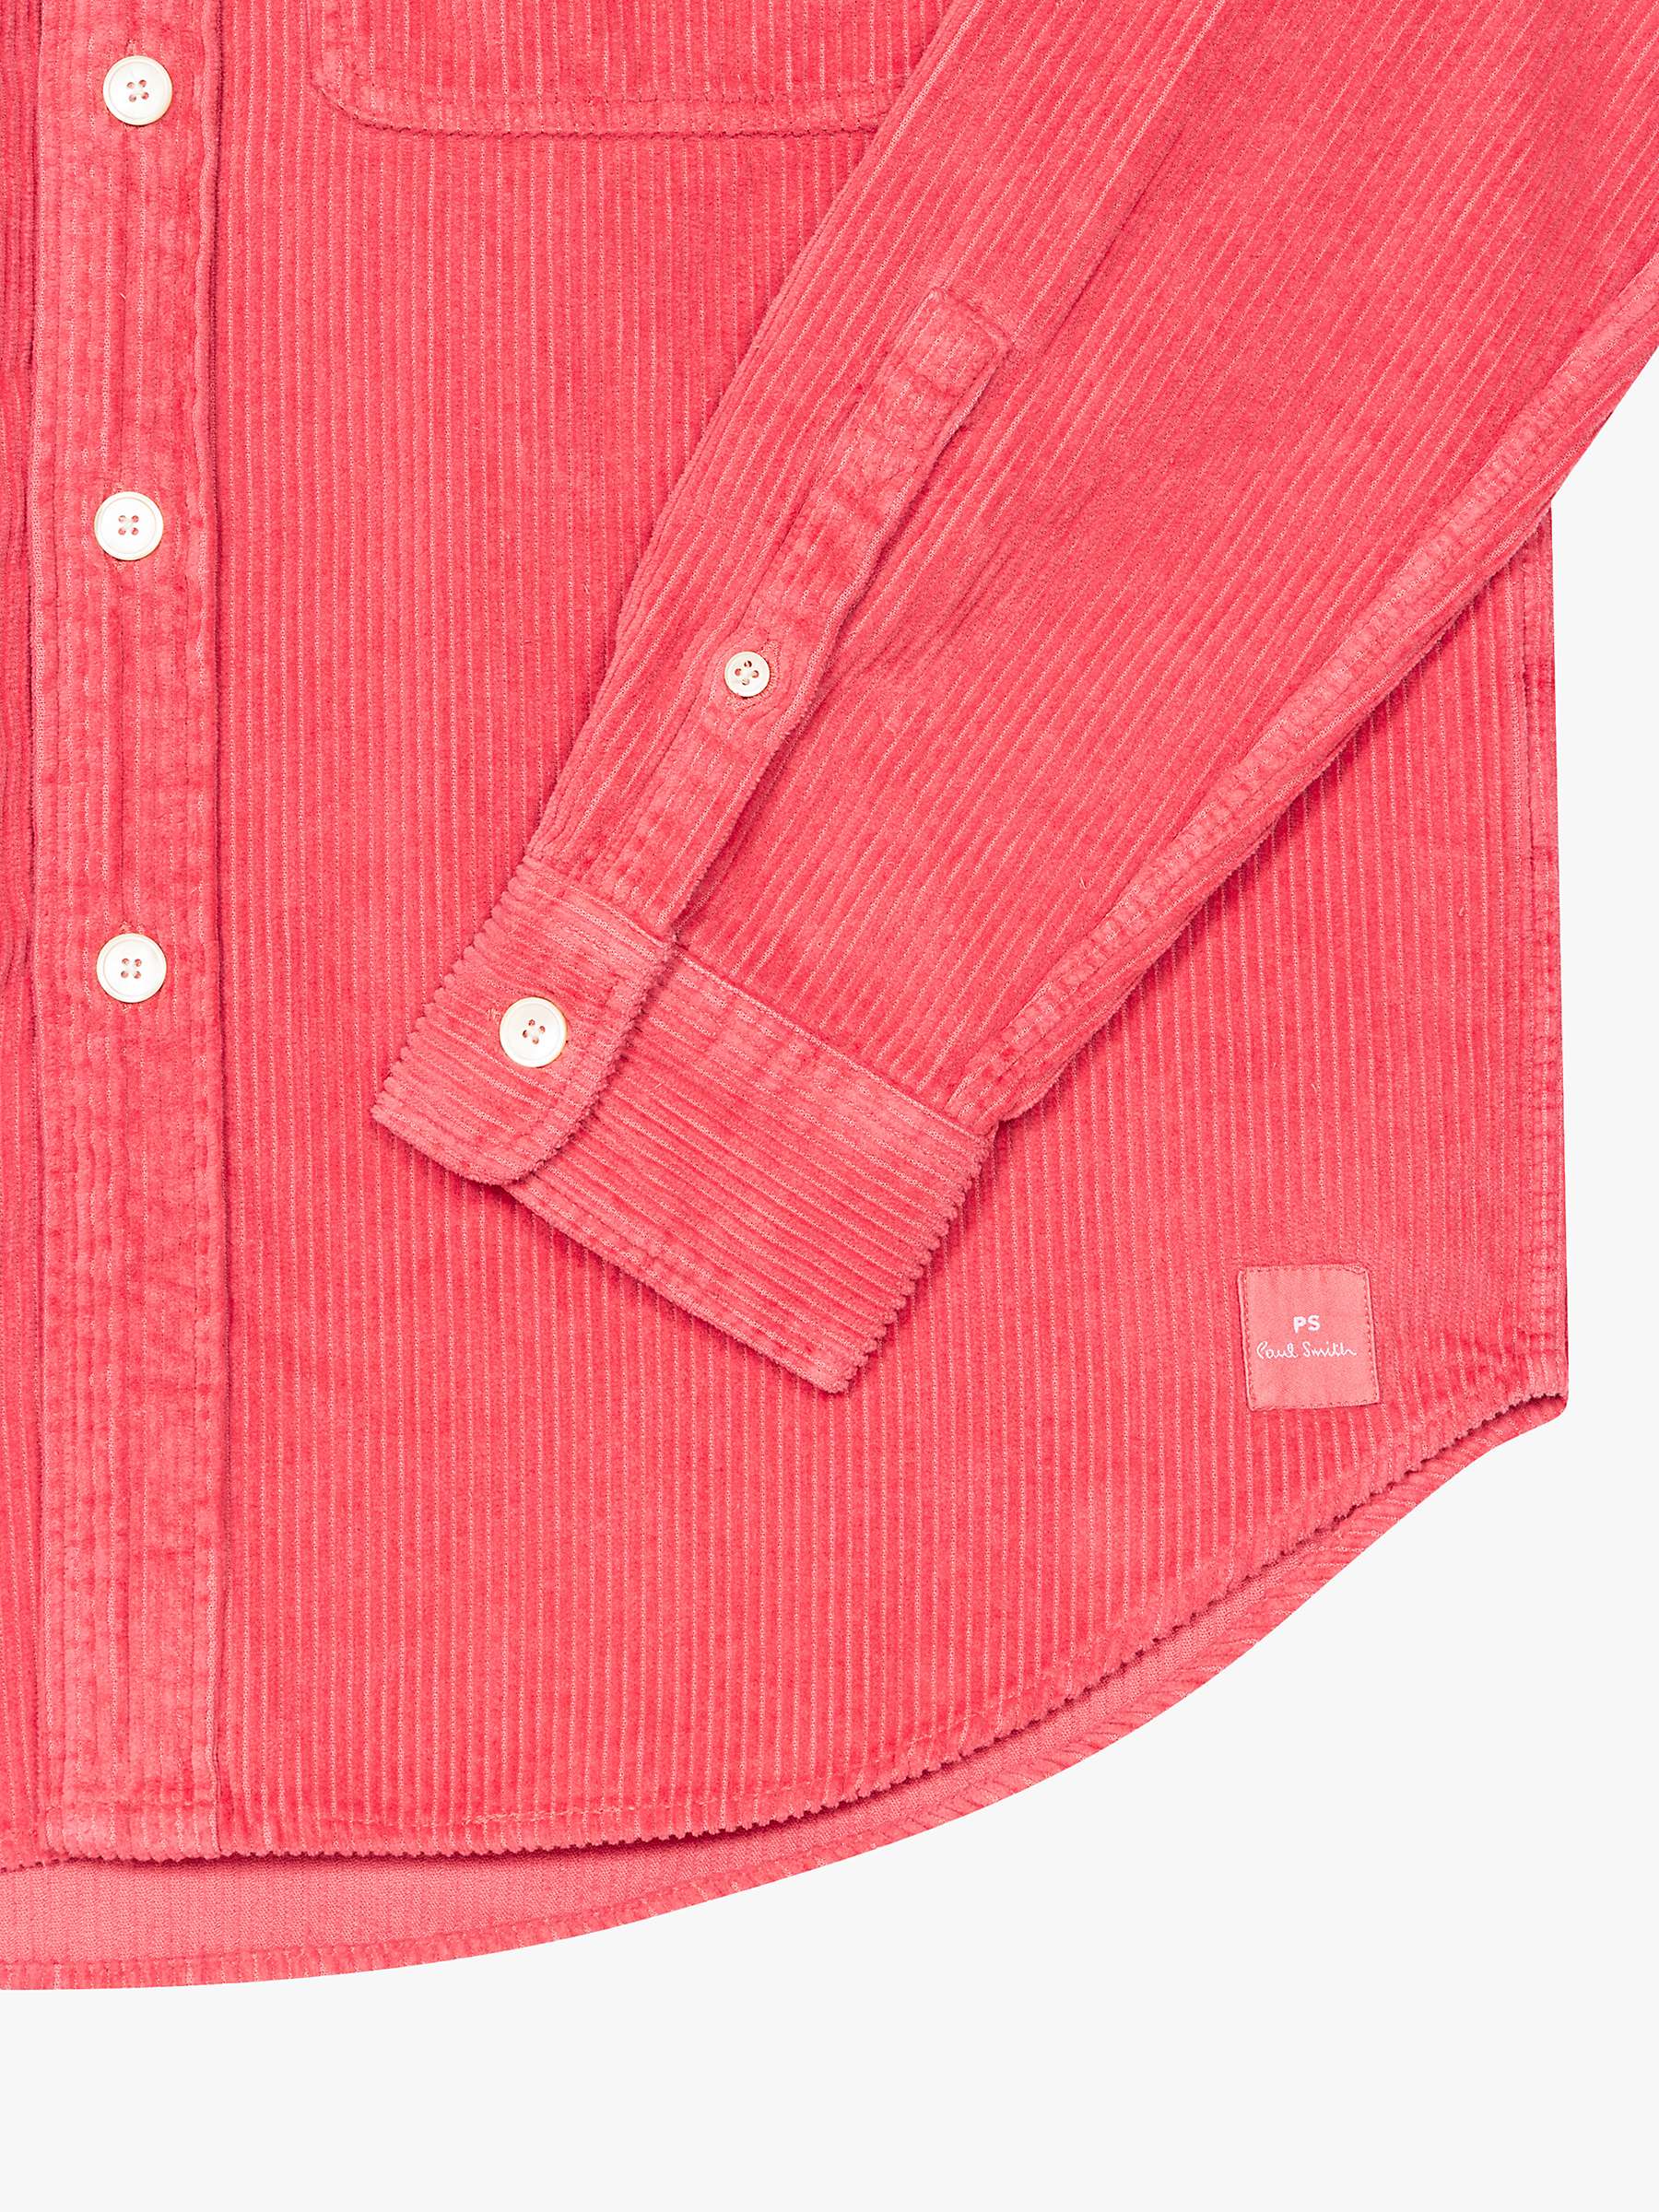 Buy Paul Smith Casual Fit Cord Shirt, Raspberry Online at johnlewis.com